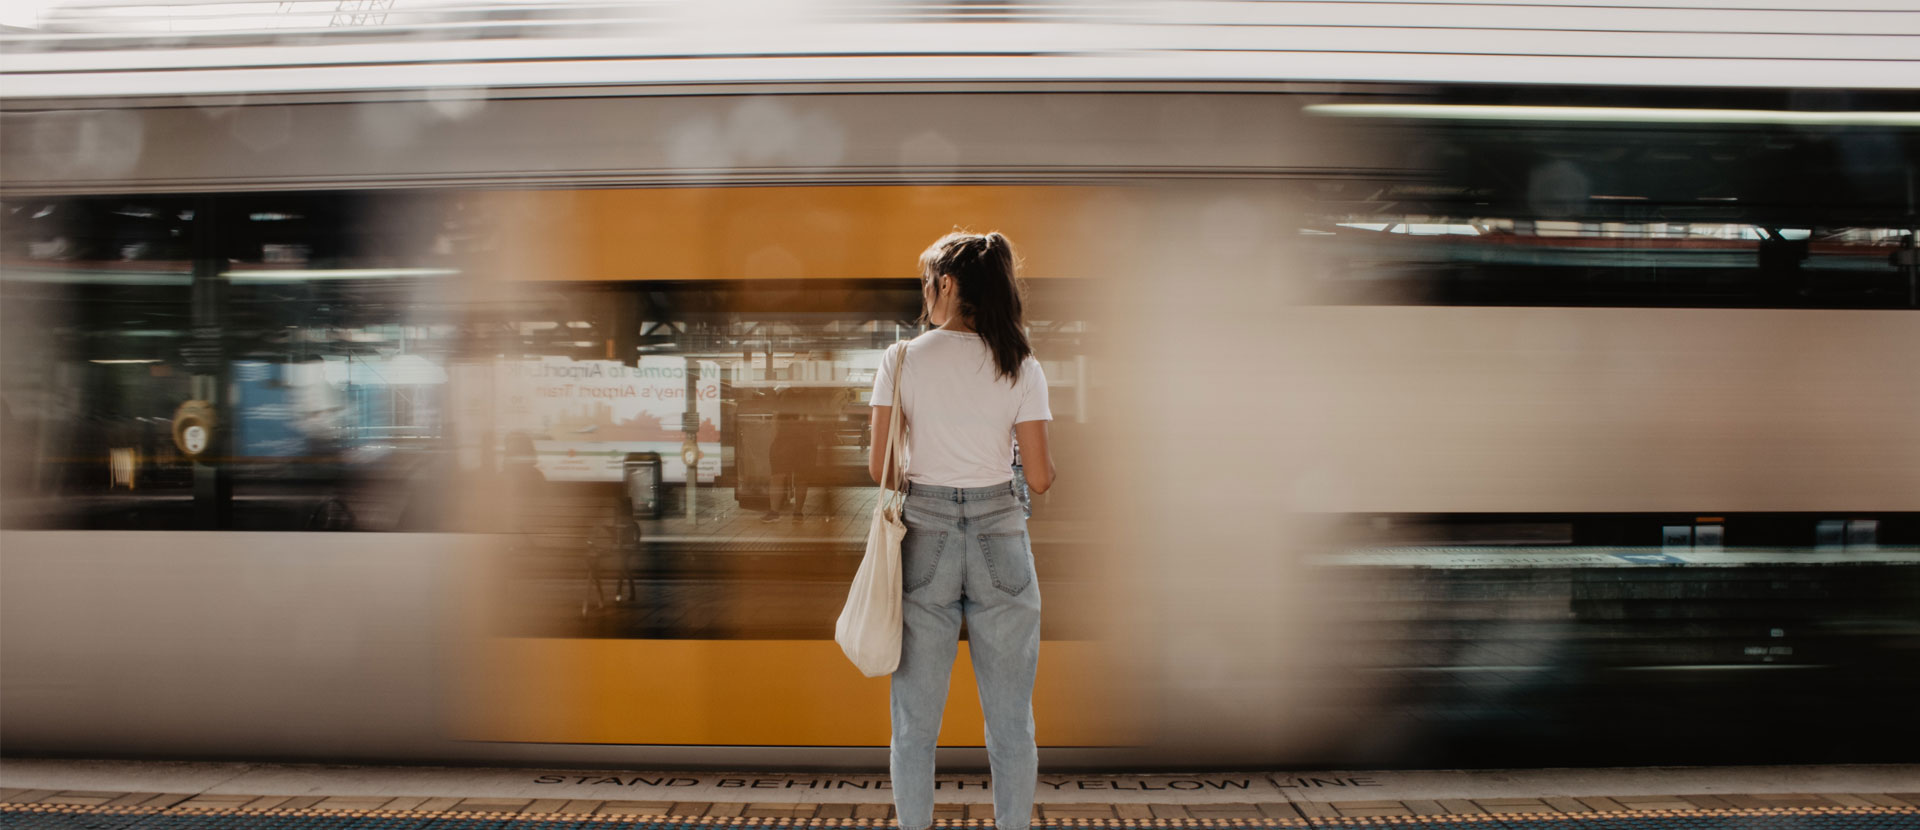 Woman standing on a train platform as a train goes by